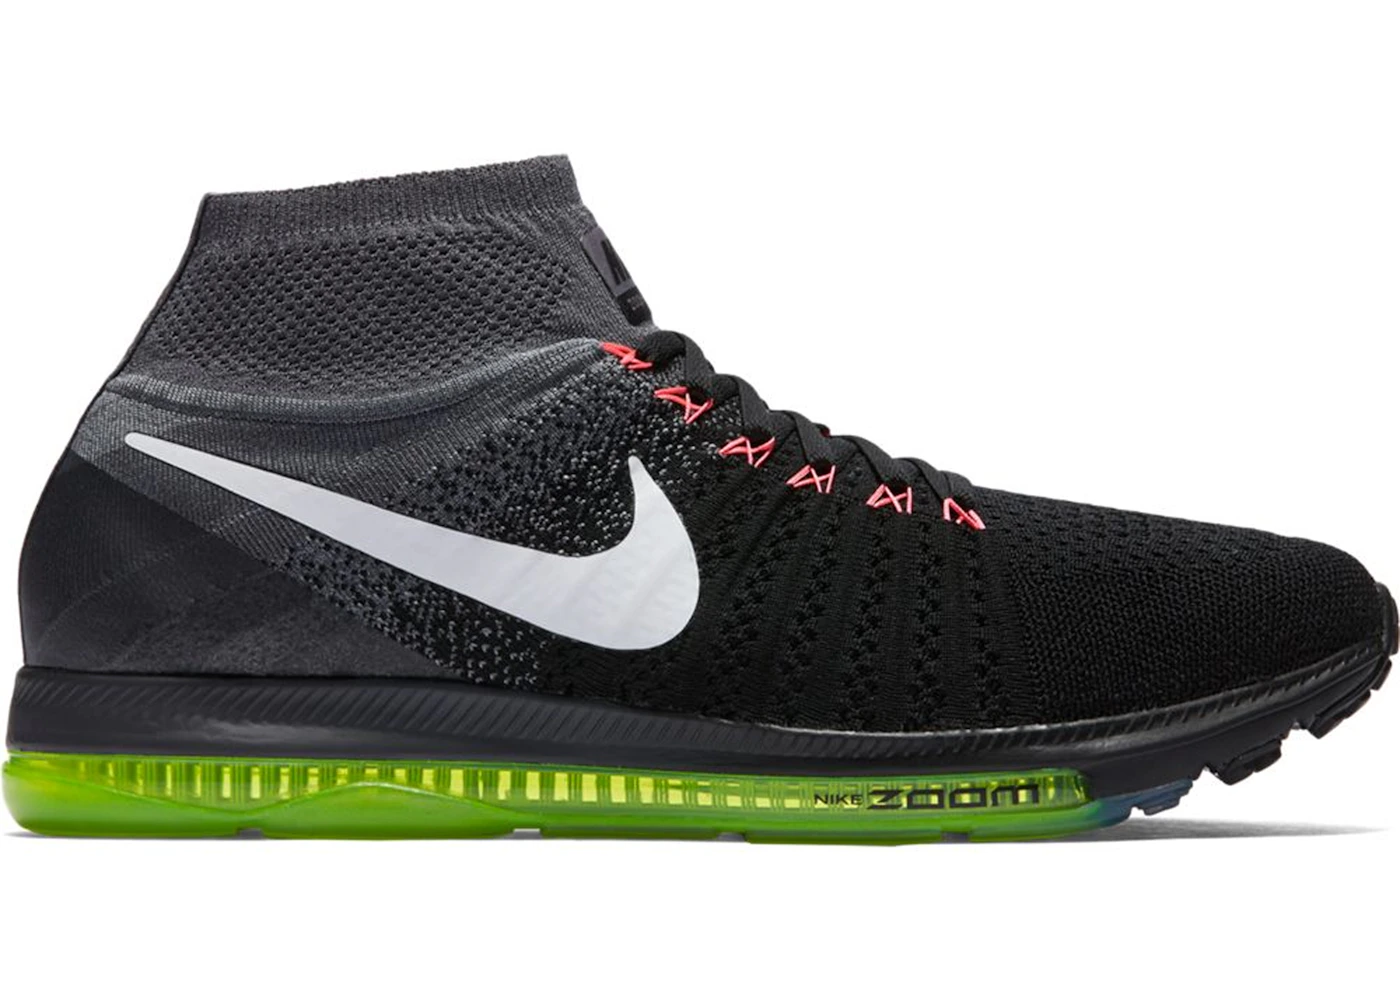 Nike Zoom All Out Flyknit Black White Volt (Women's) - 845361-002 - US